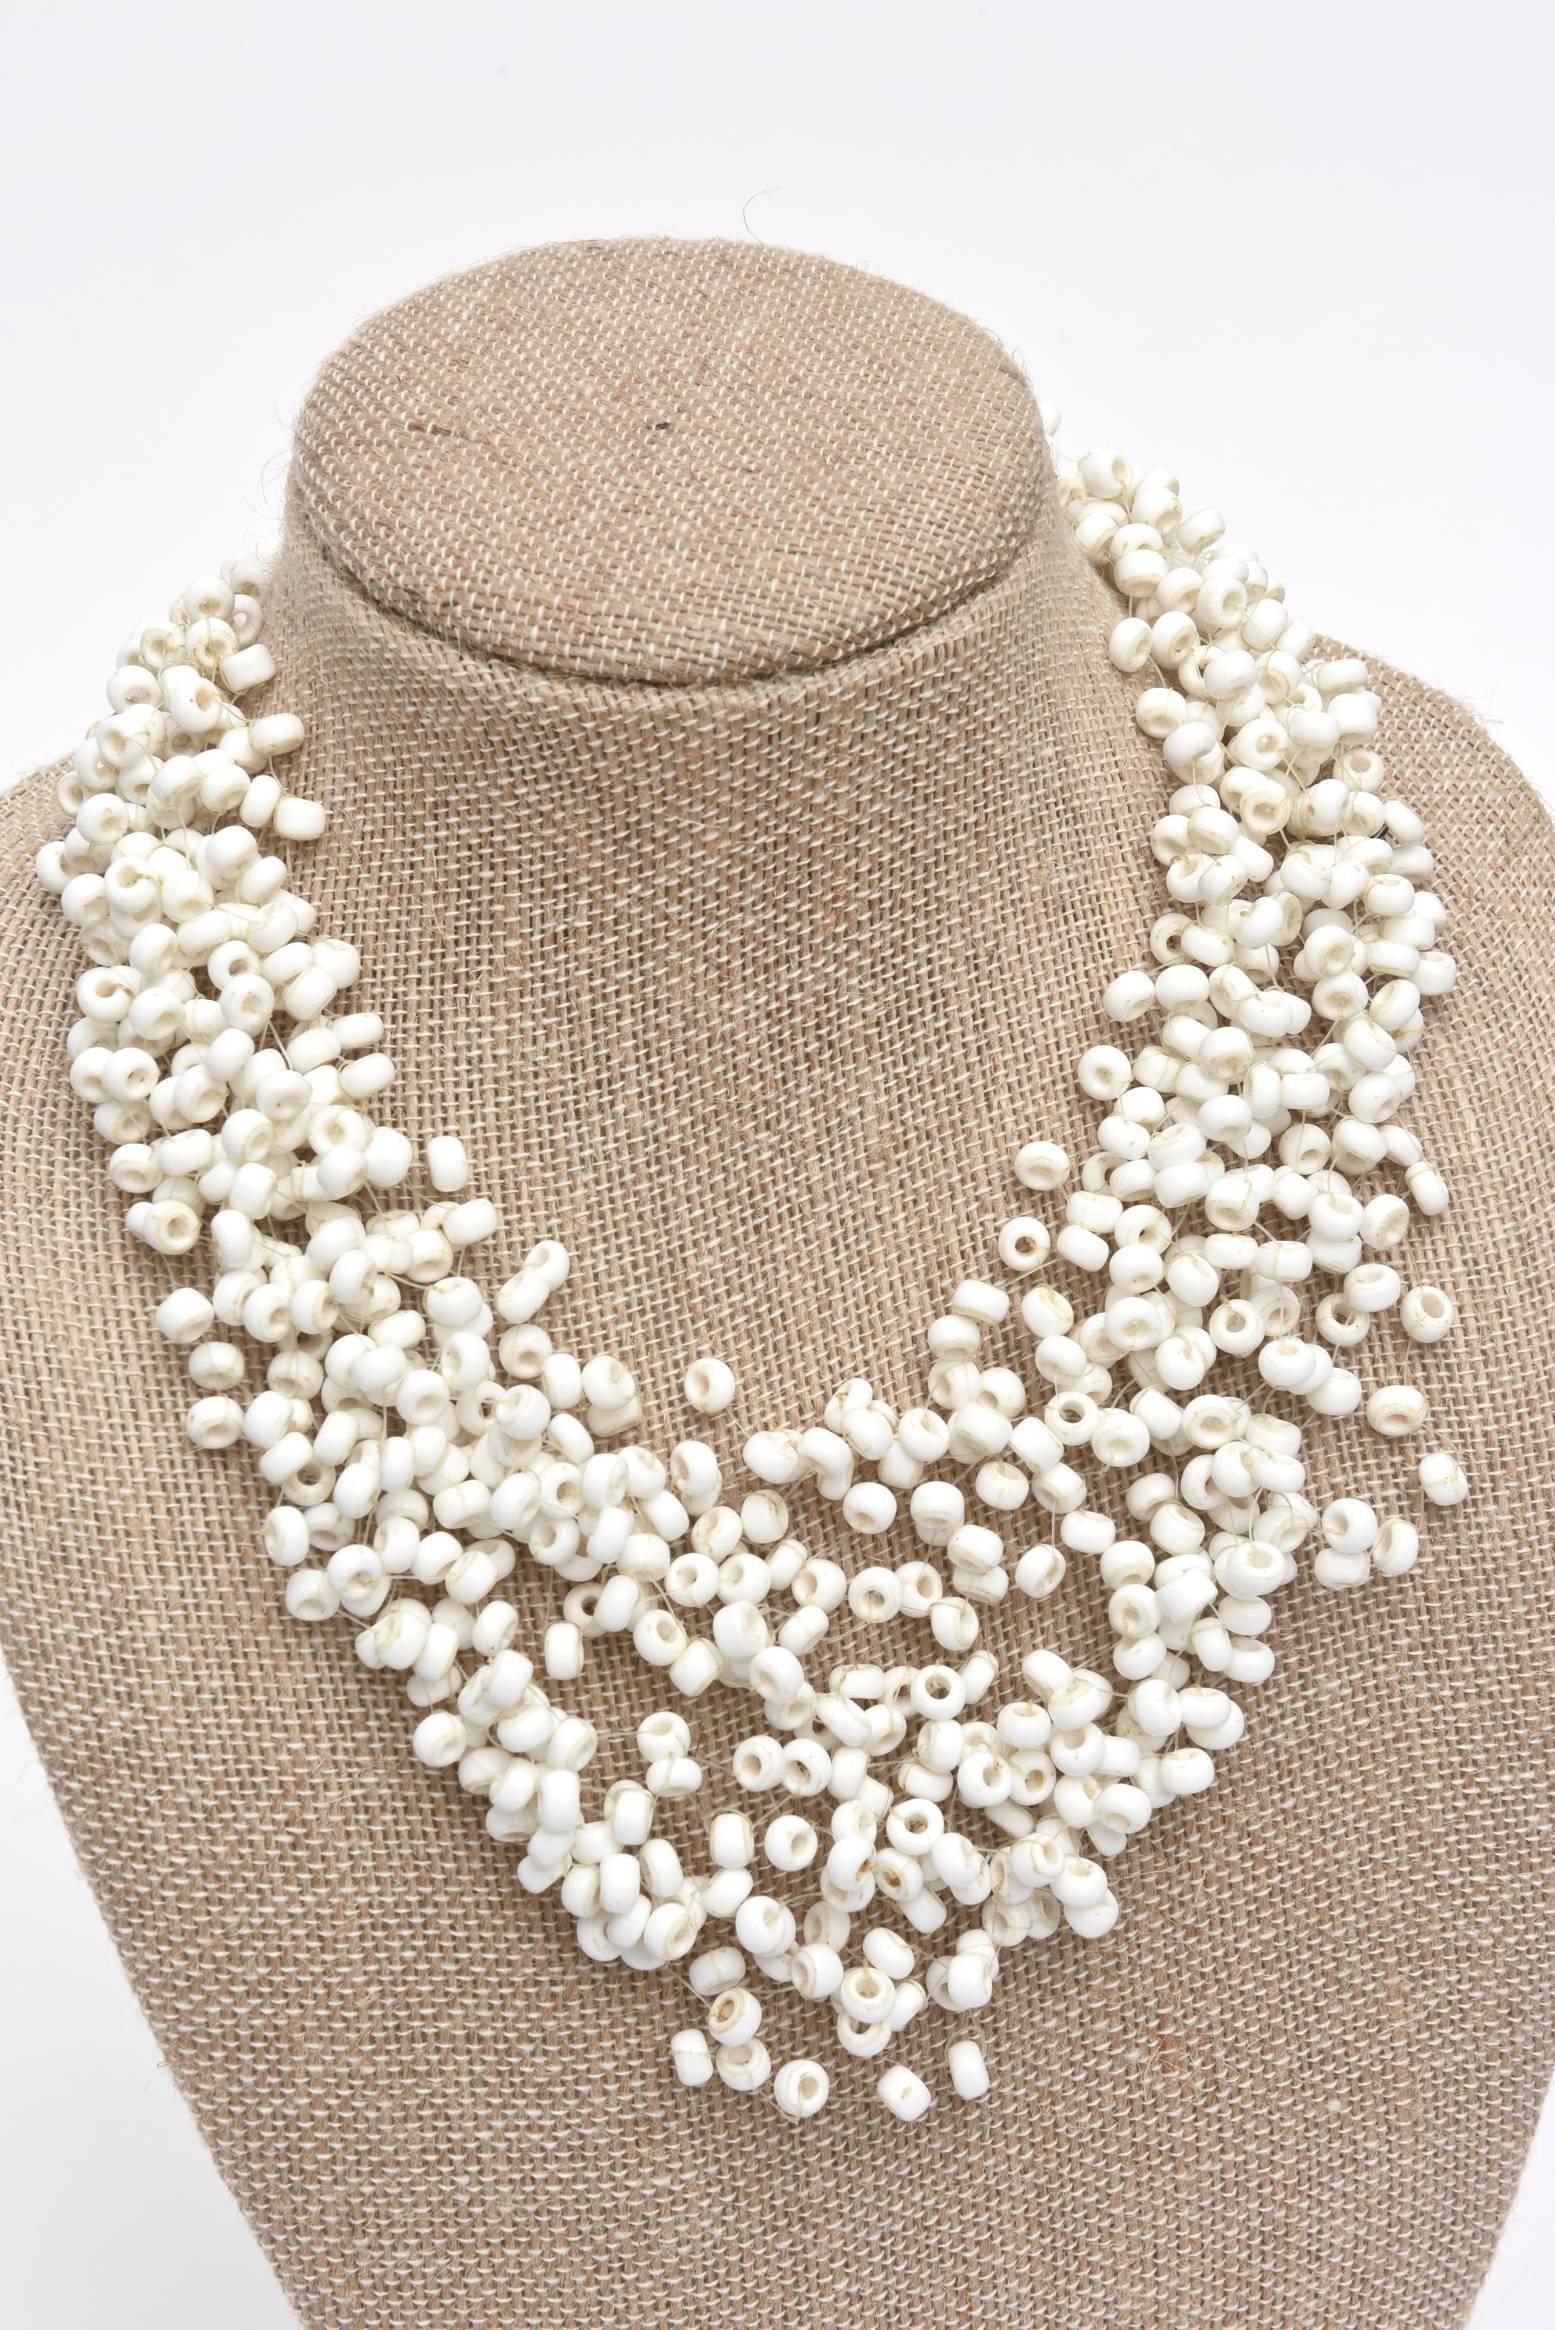  Langani Vintage Multi Strand White Beaded Necklace and Pair Of Clip On Earrings In Good Condition For Sale In North Miami, FL